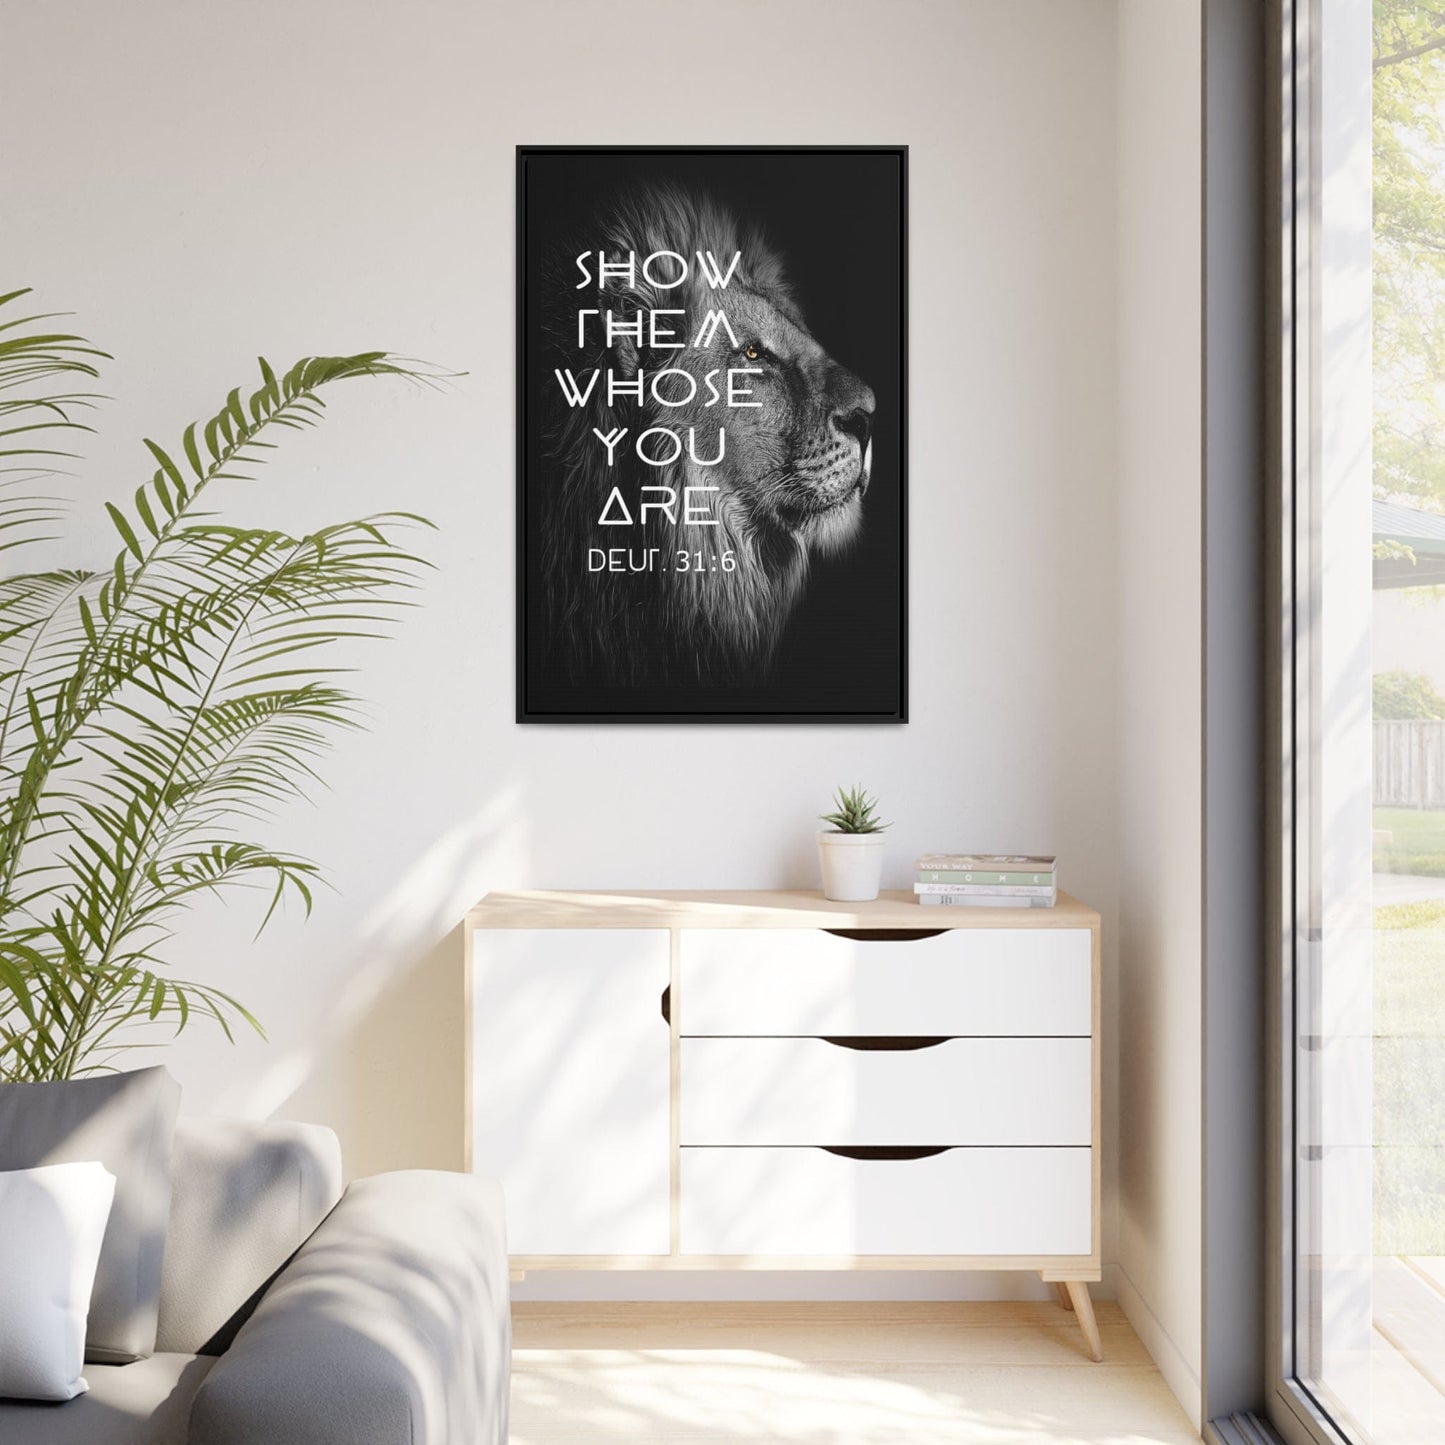 Printify Canvas Show Them Whose You Are - Deuteronomy 31:6 Christian Canvas Wall Art